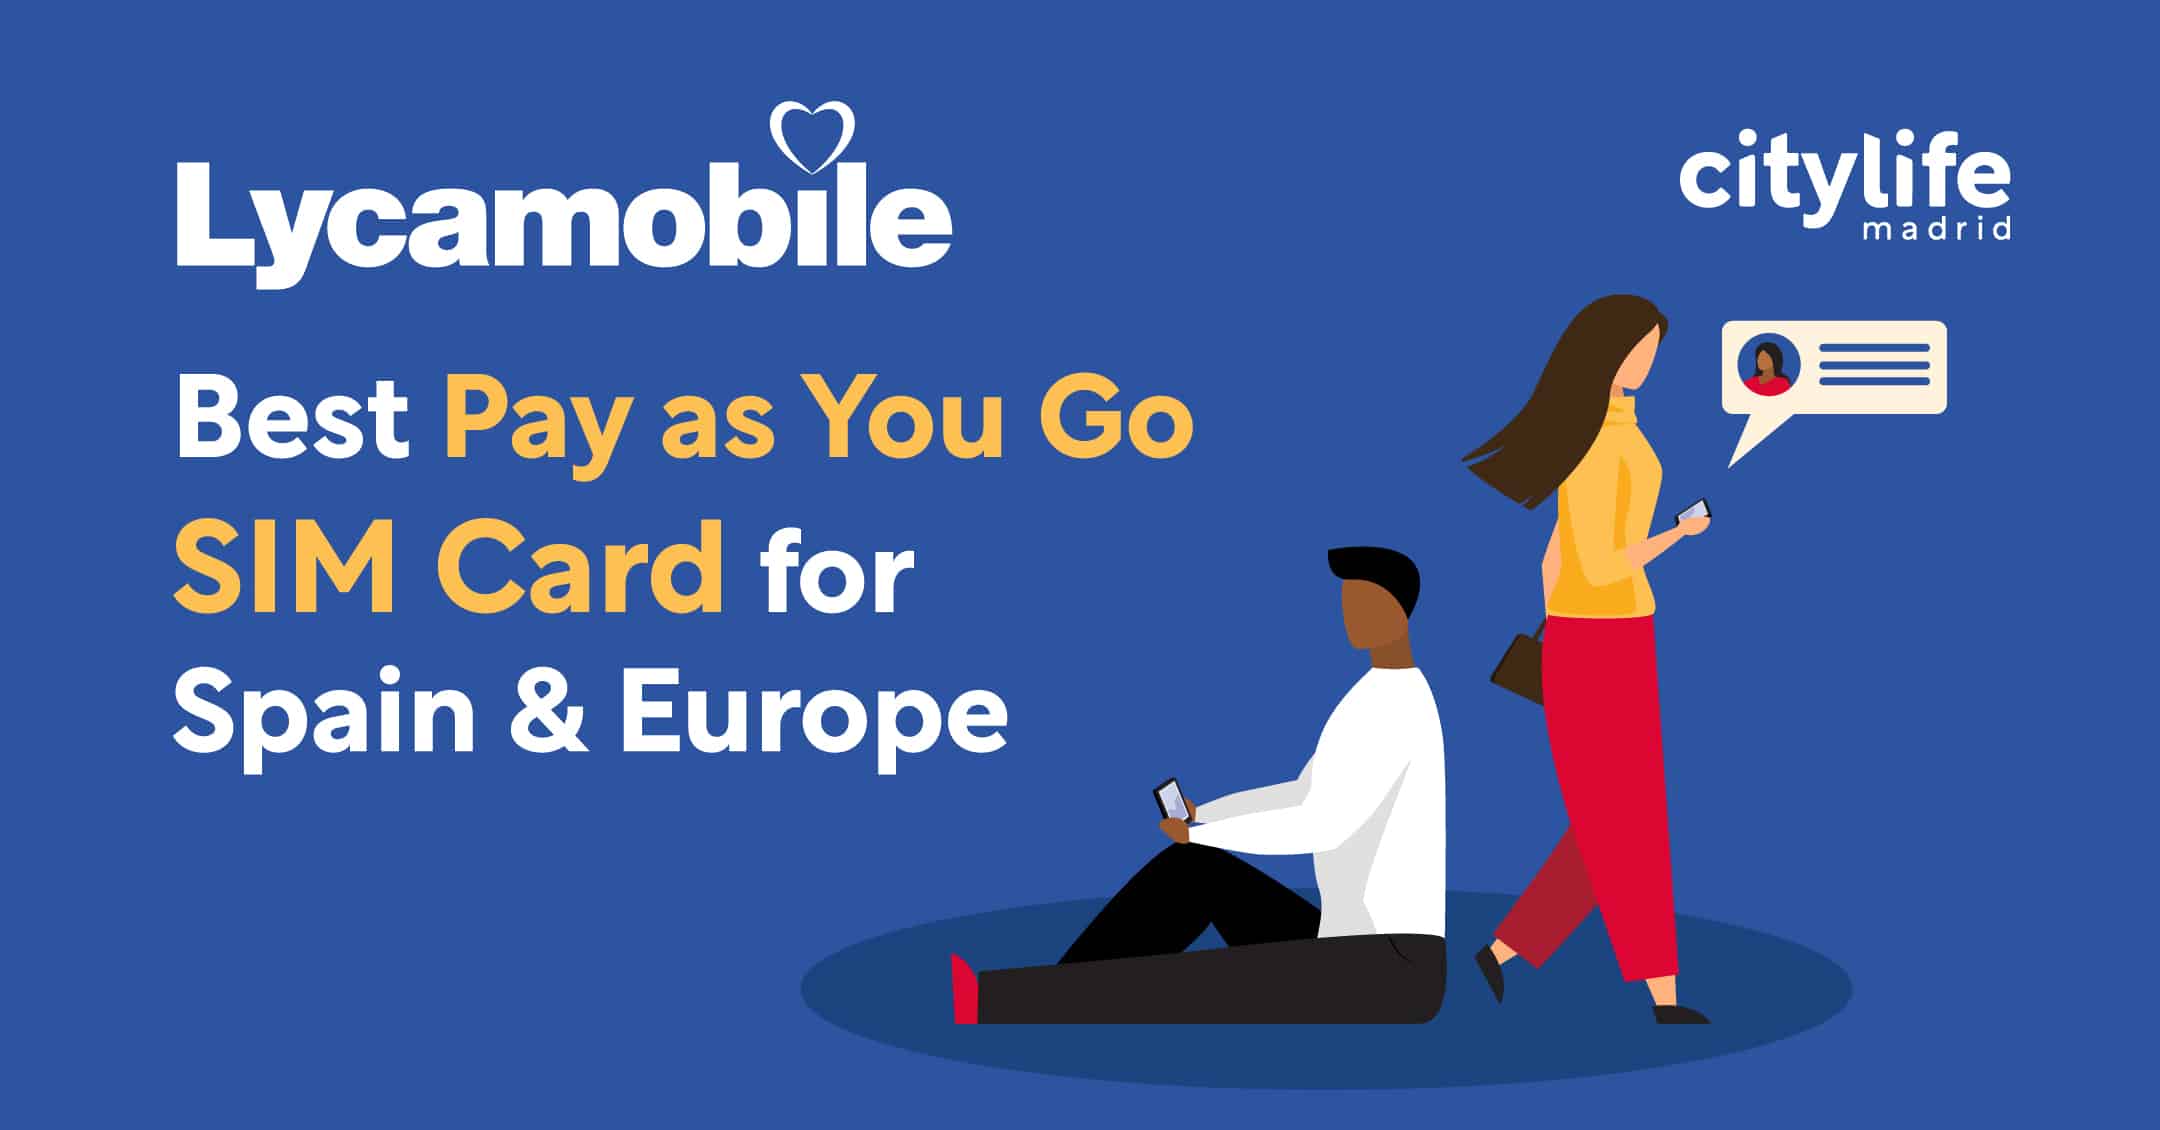 Lycamobile - Best You for Europe Spain Go as SIM Card Pay 